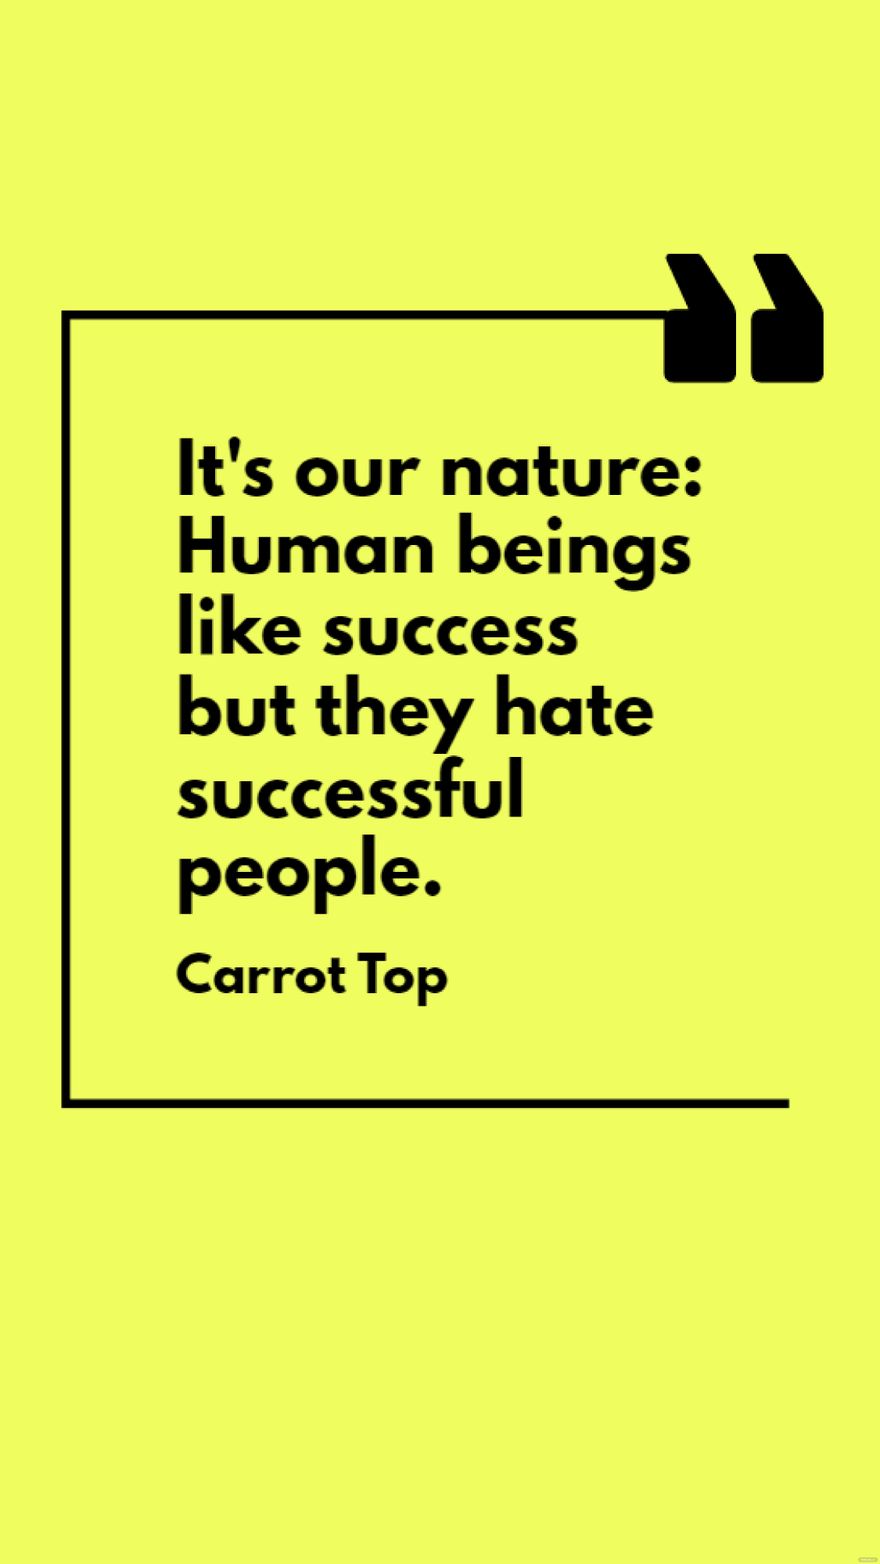 Carrot Top - It's our nature: Human beings like success but they hate successful people. in JPG